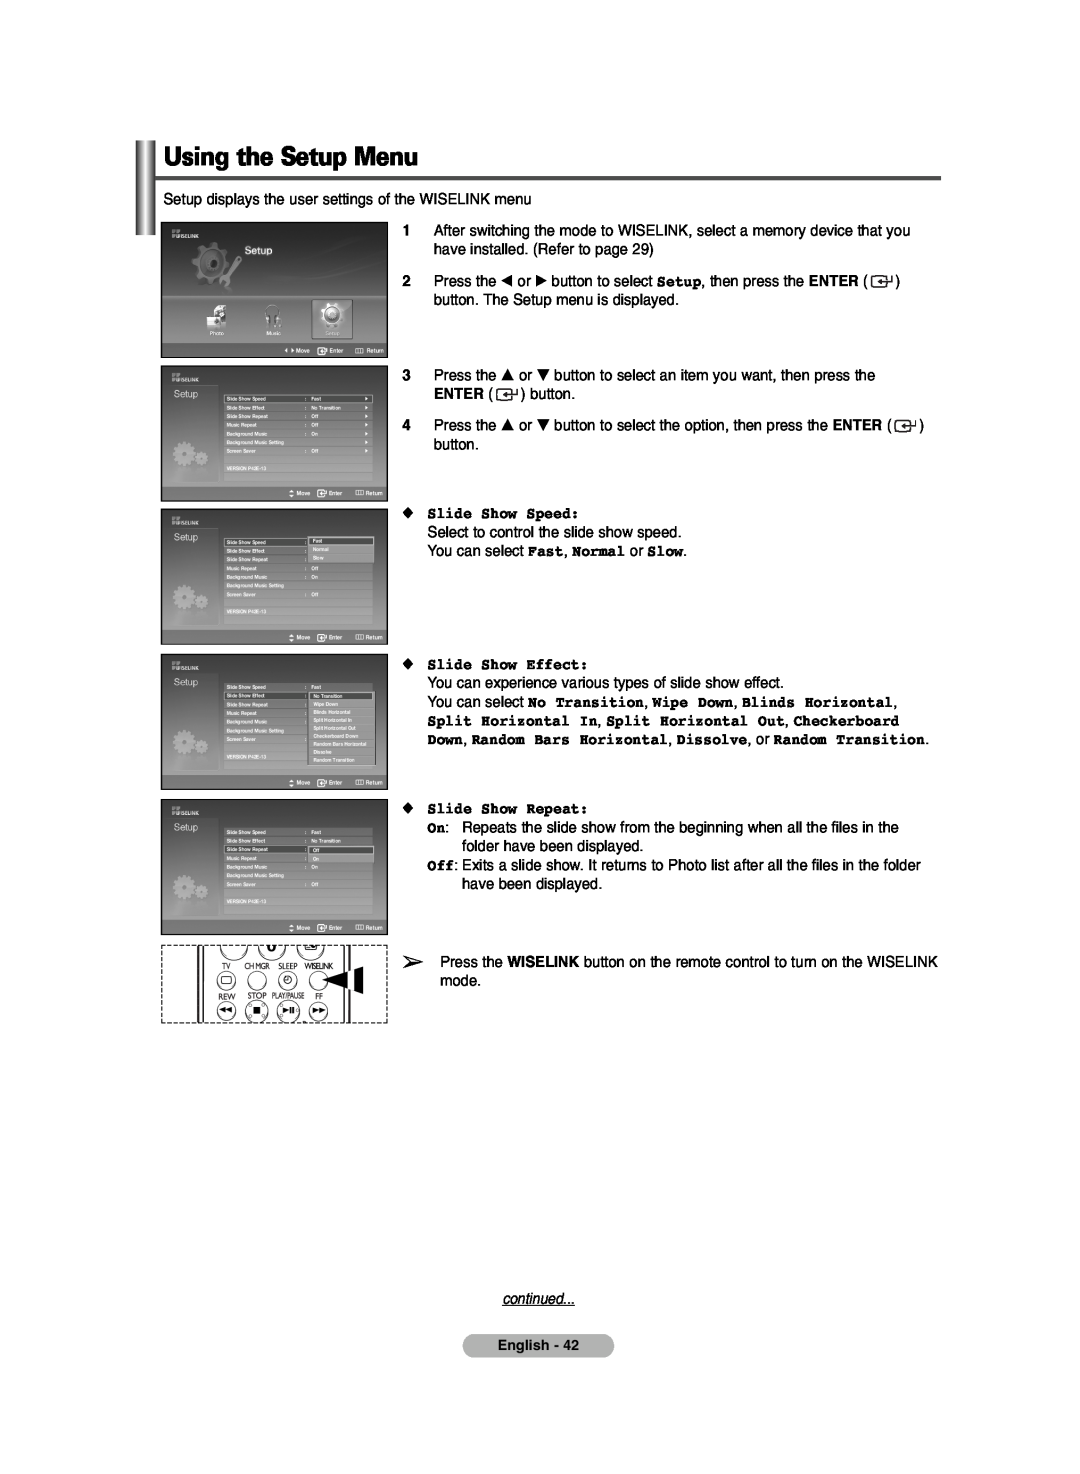 Samsung PDP-TELEVISION manual Using the Setup Menu, Slide Show Speed, Slide Show Effect, Slide Show Repeat, continued 